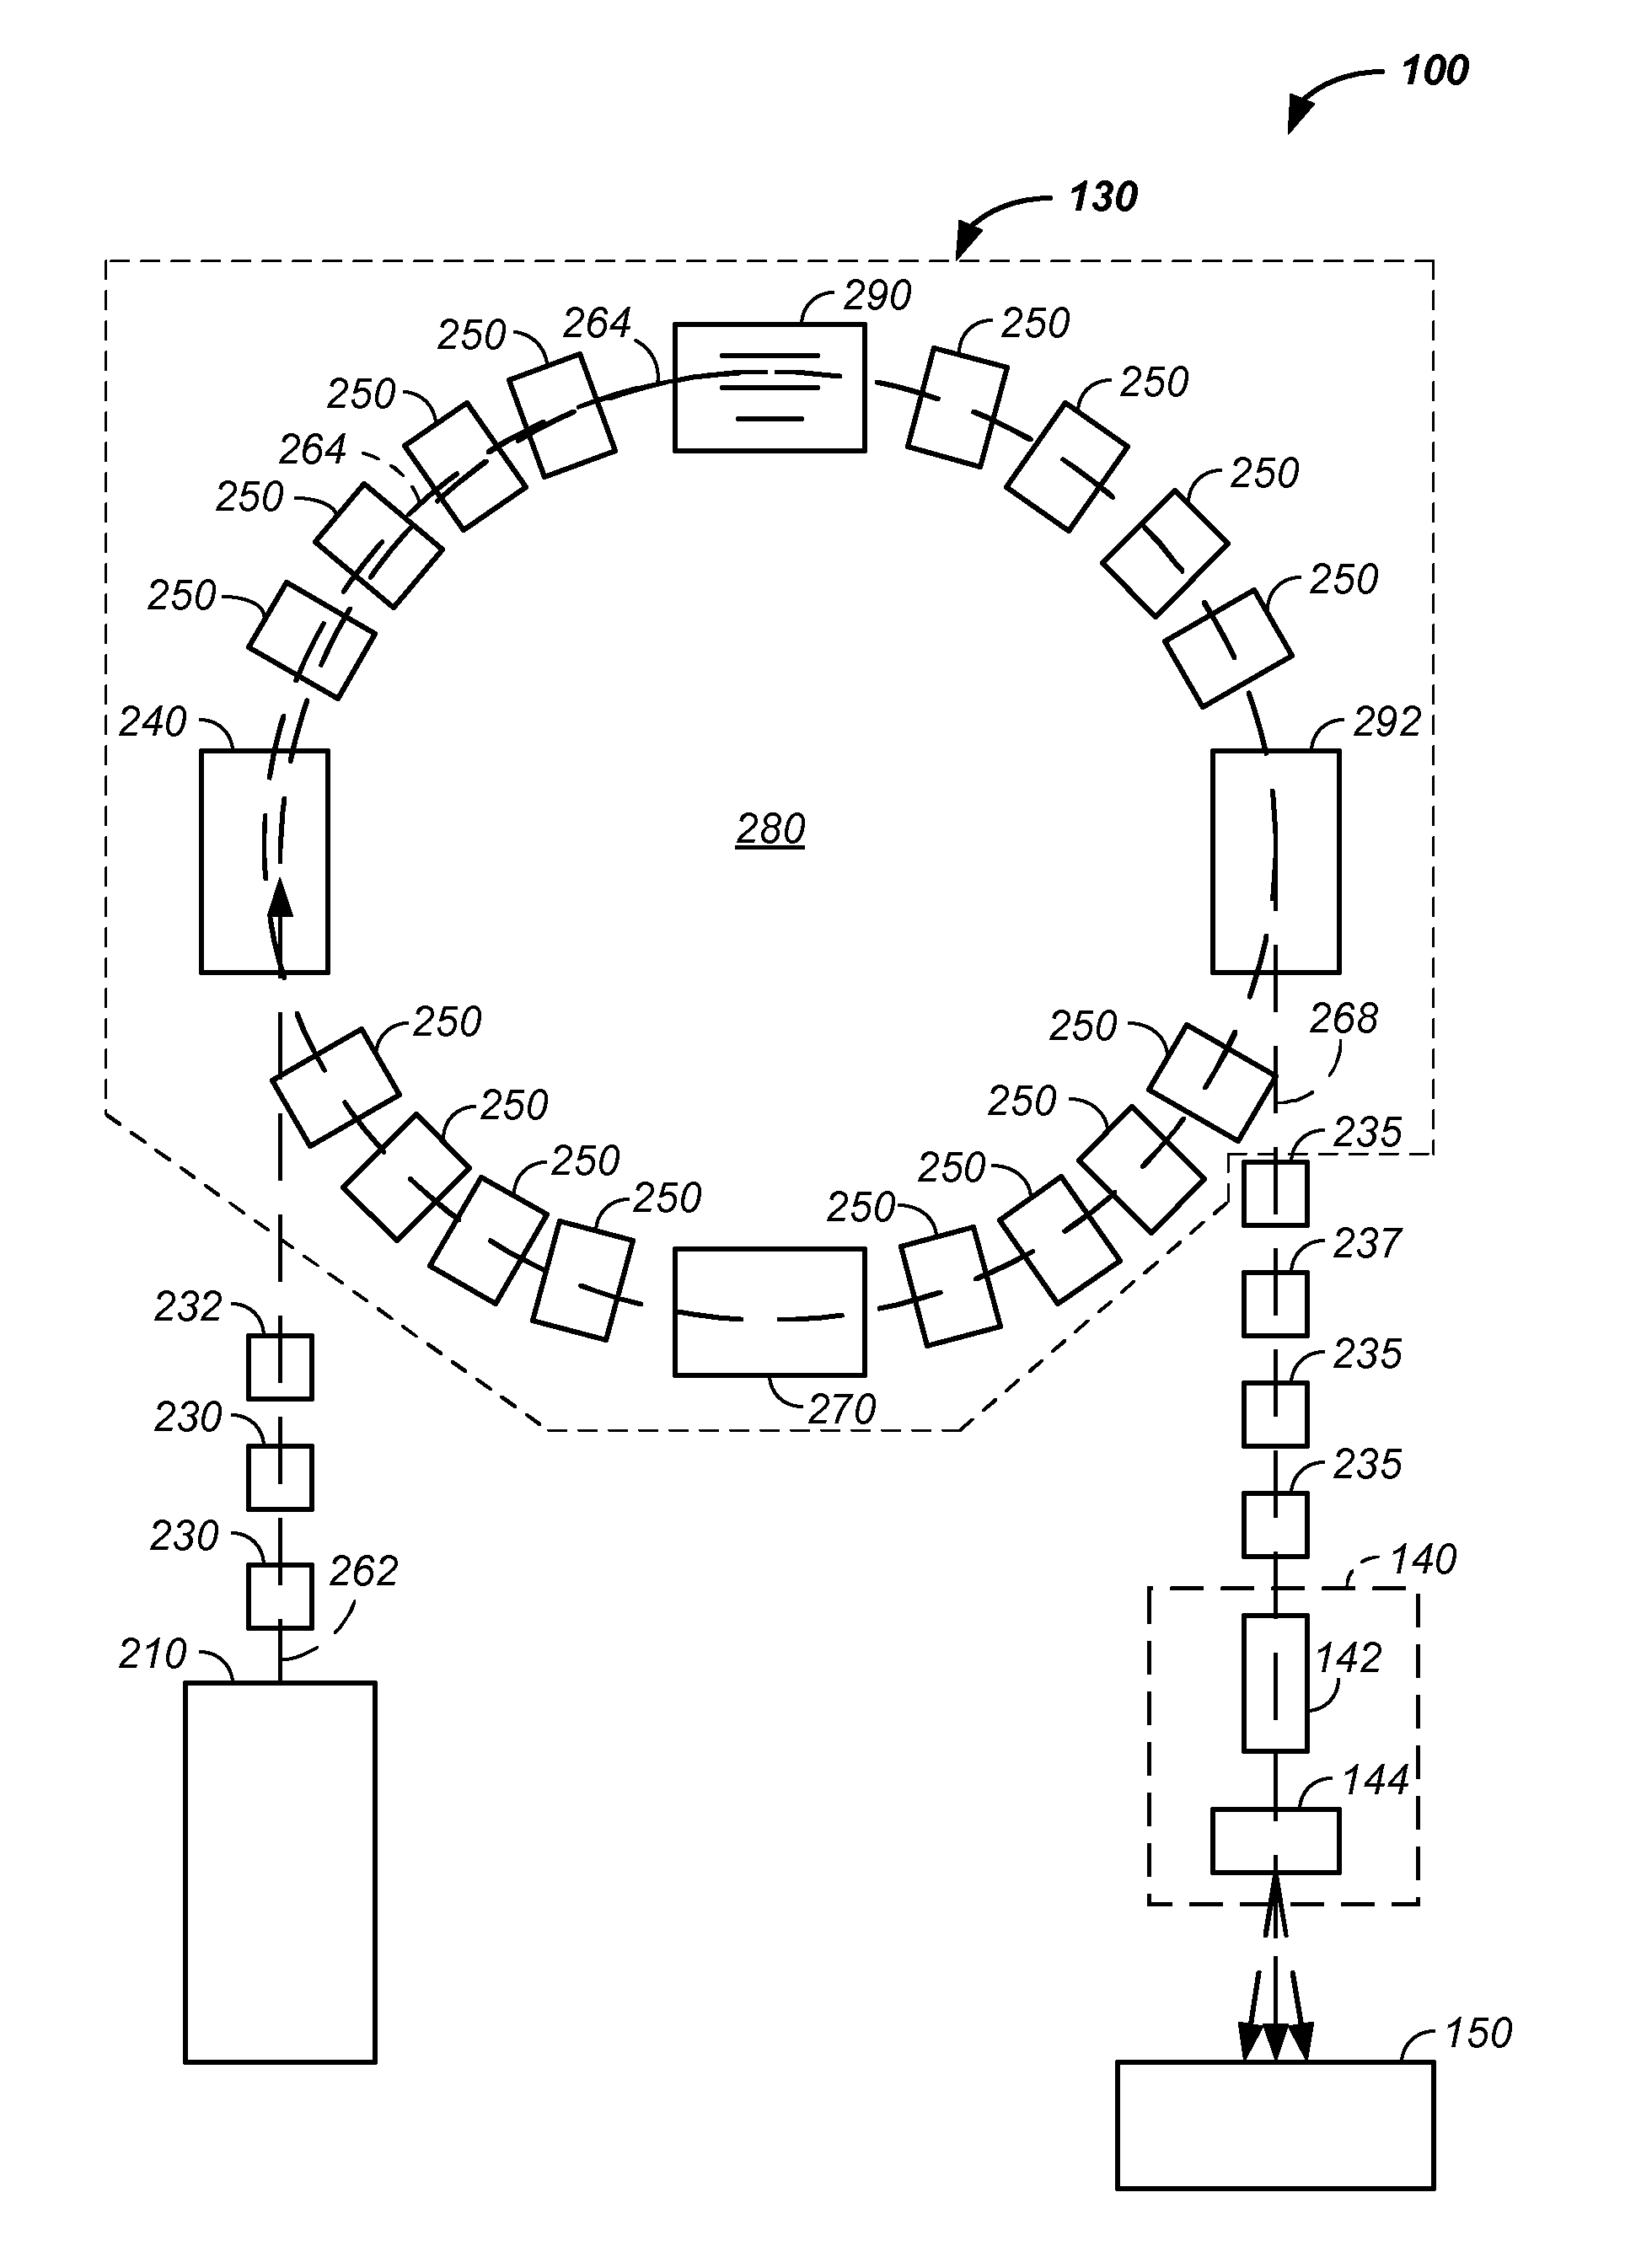 Charged particle beam acceleration and extraction method and apparatus used in conjunction with a charged particle cancer therapy system